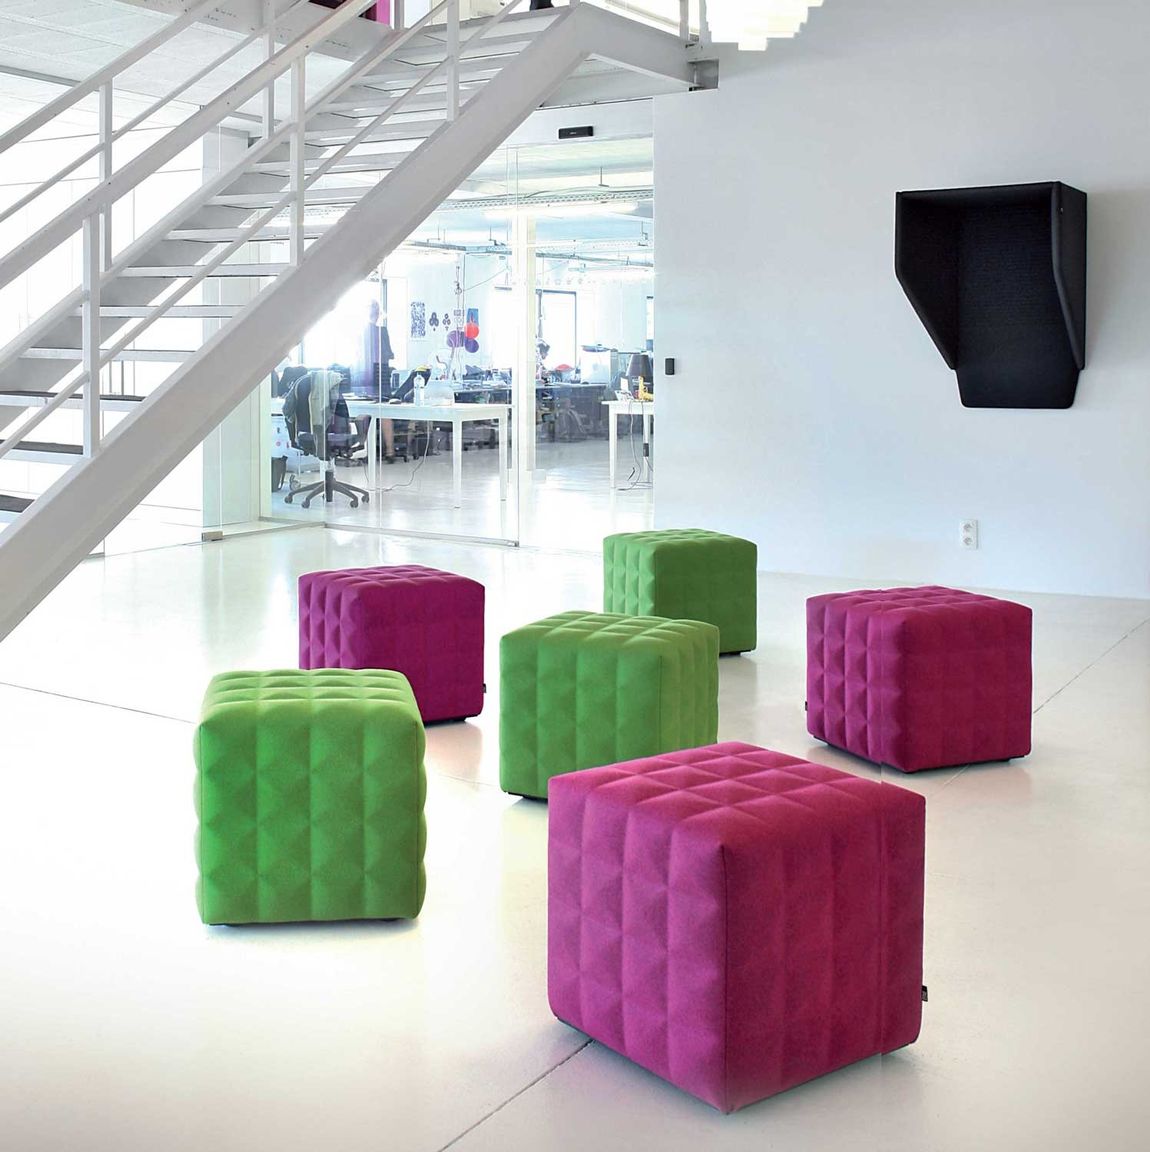 Acoustic Treated Furniture for Creative Office Space